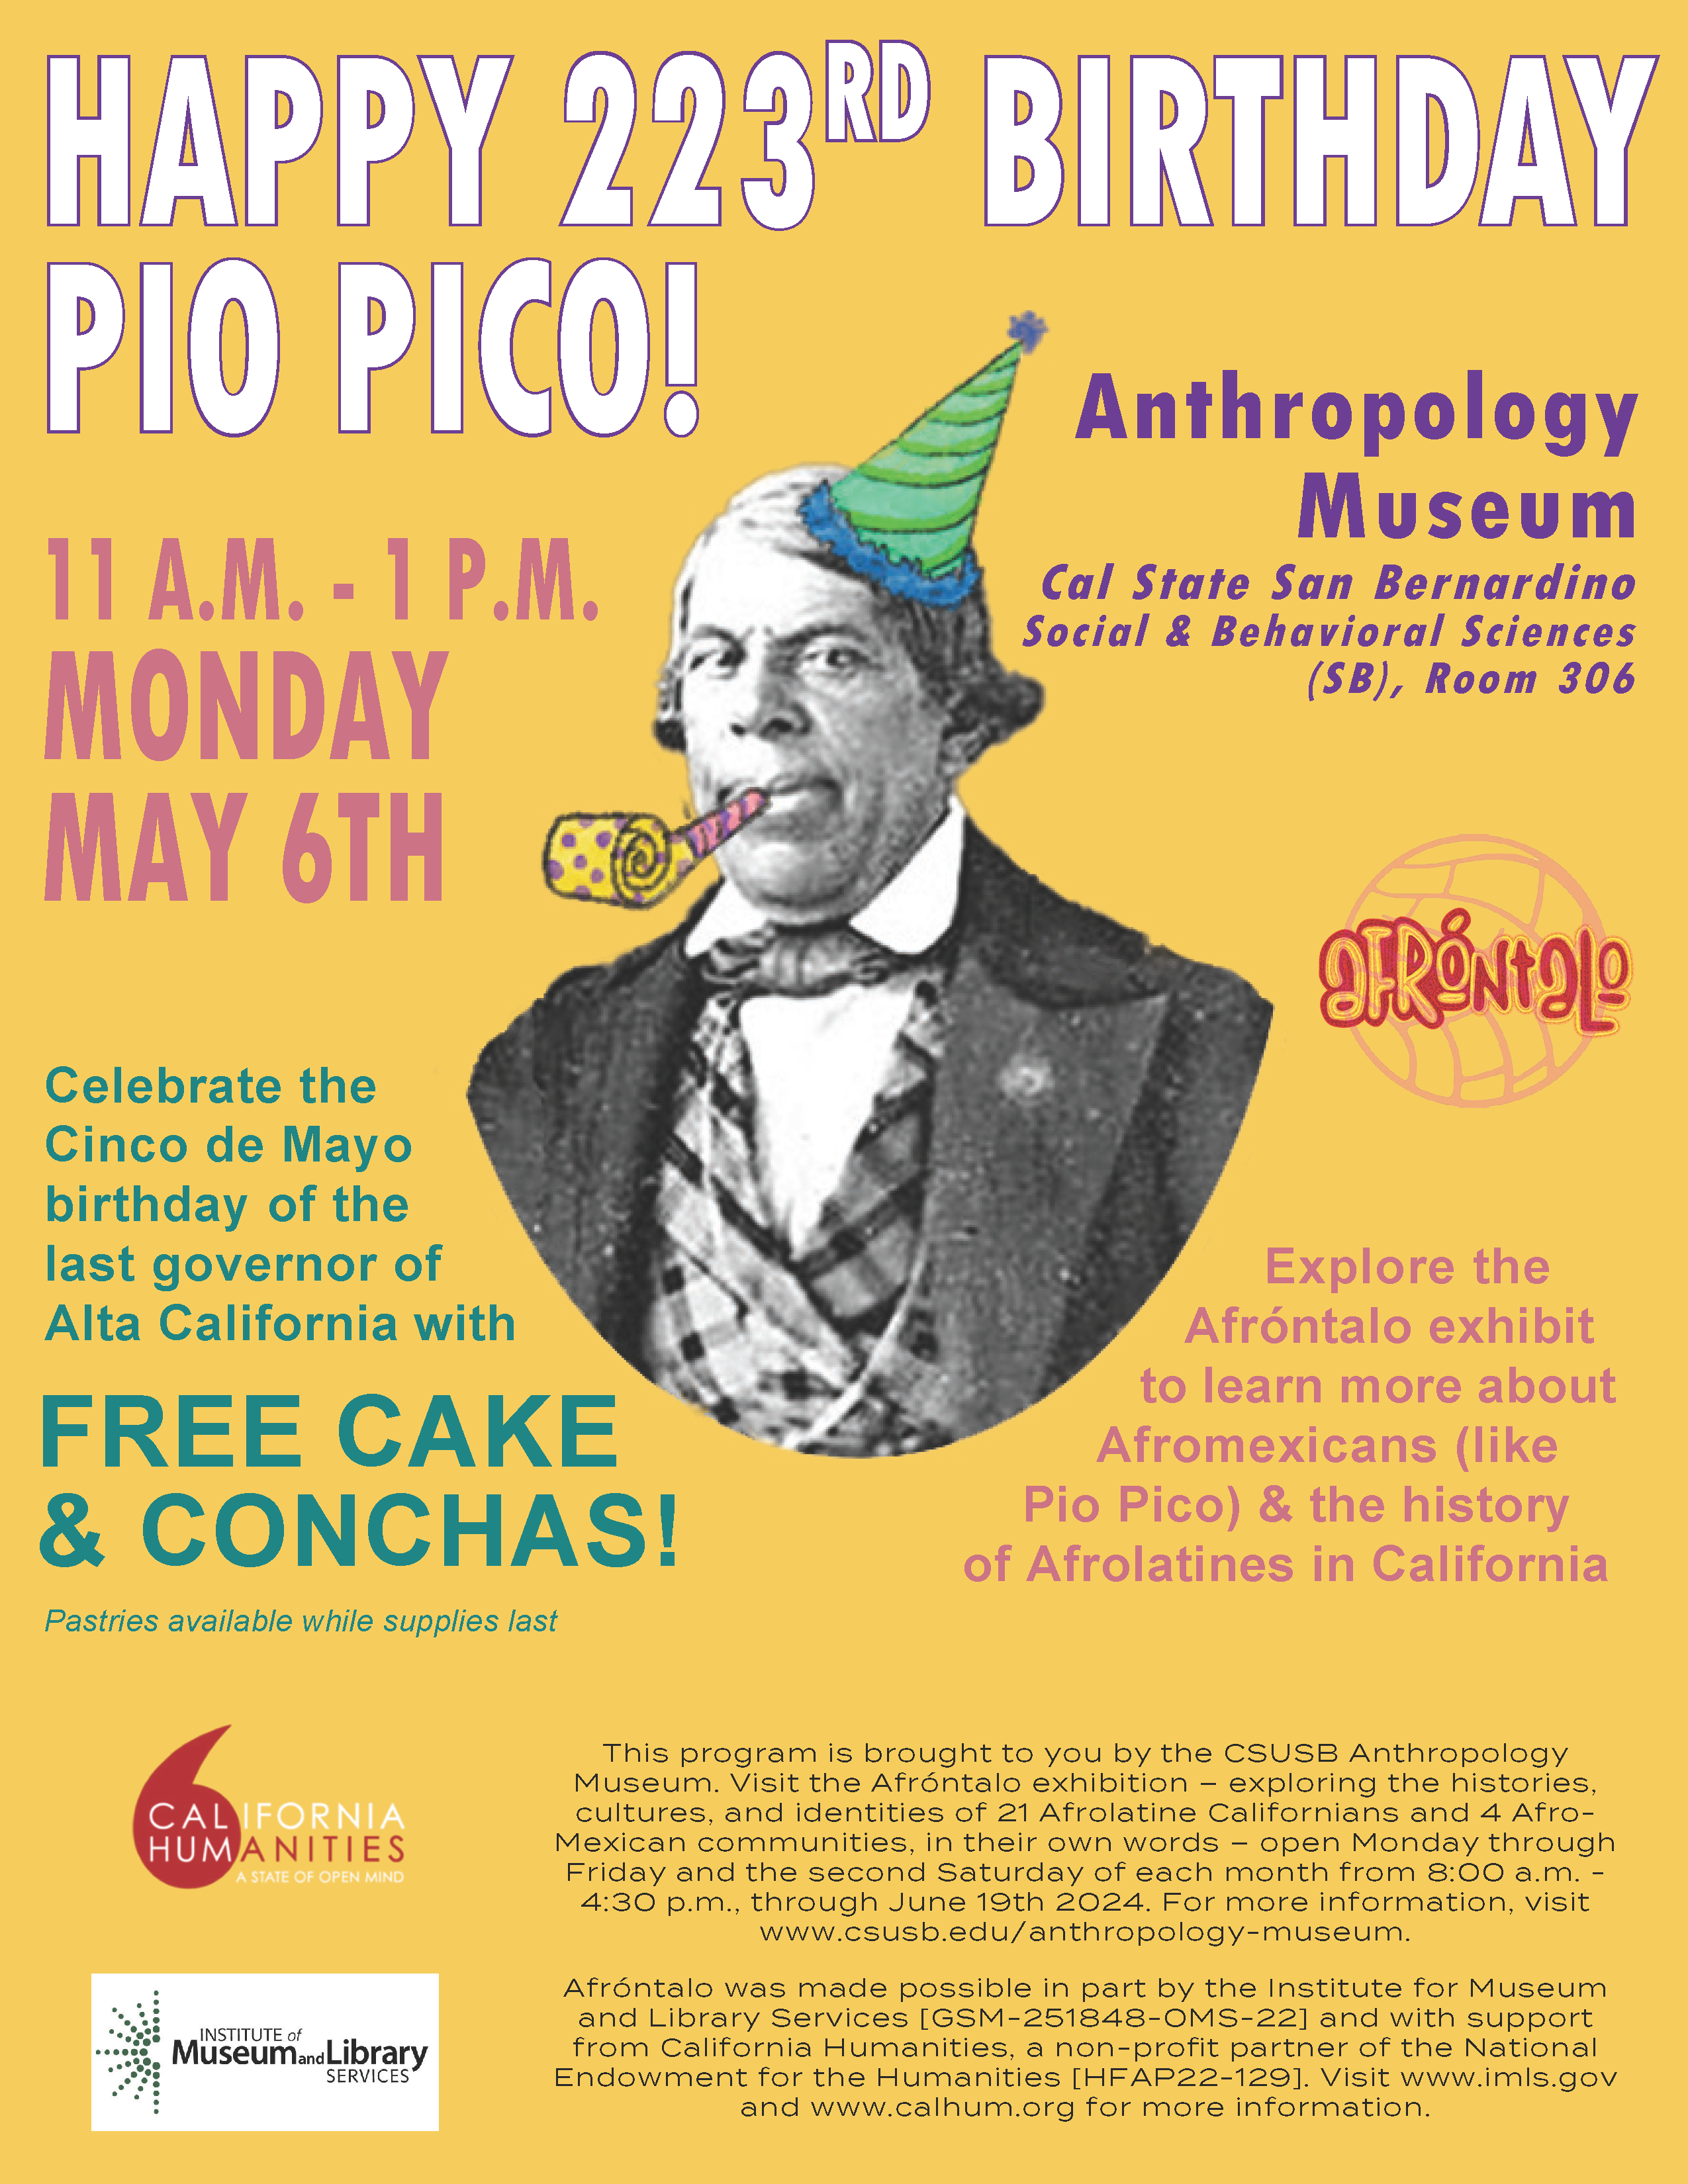 Poster showing historic photo of Pio Pico with birthday hat and kazoo edited onto his head.